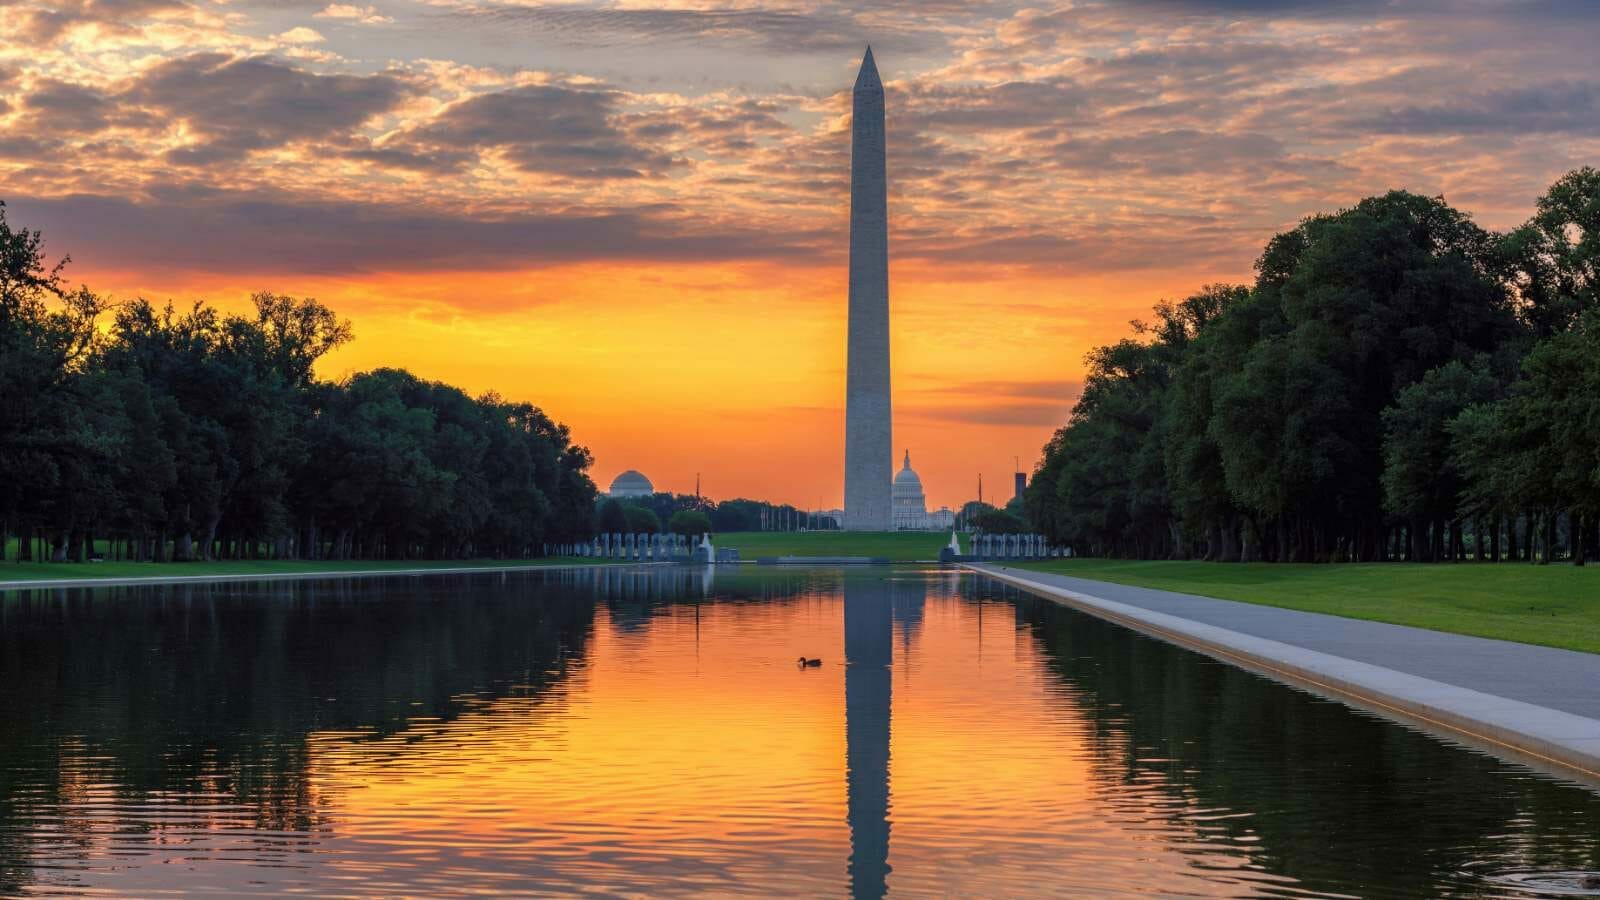 <p>The National Mall is a large park in the center of Washington D.C. that is home to many famous monuments and museums, including the Lincoln Memorial and the Smithsonian Institution.</p>